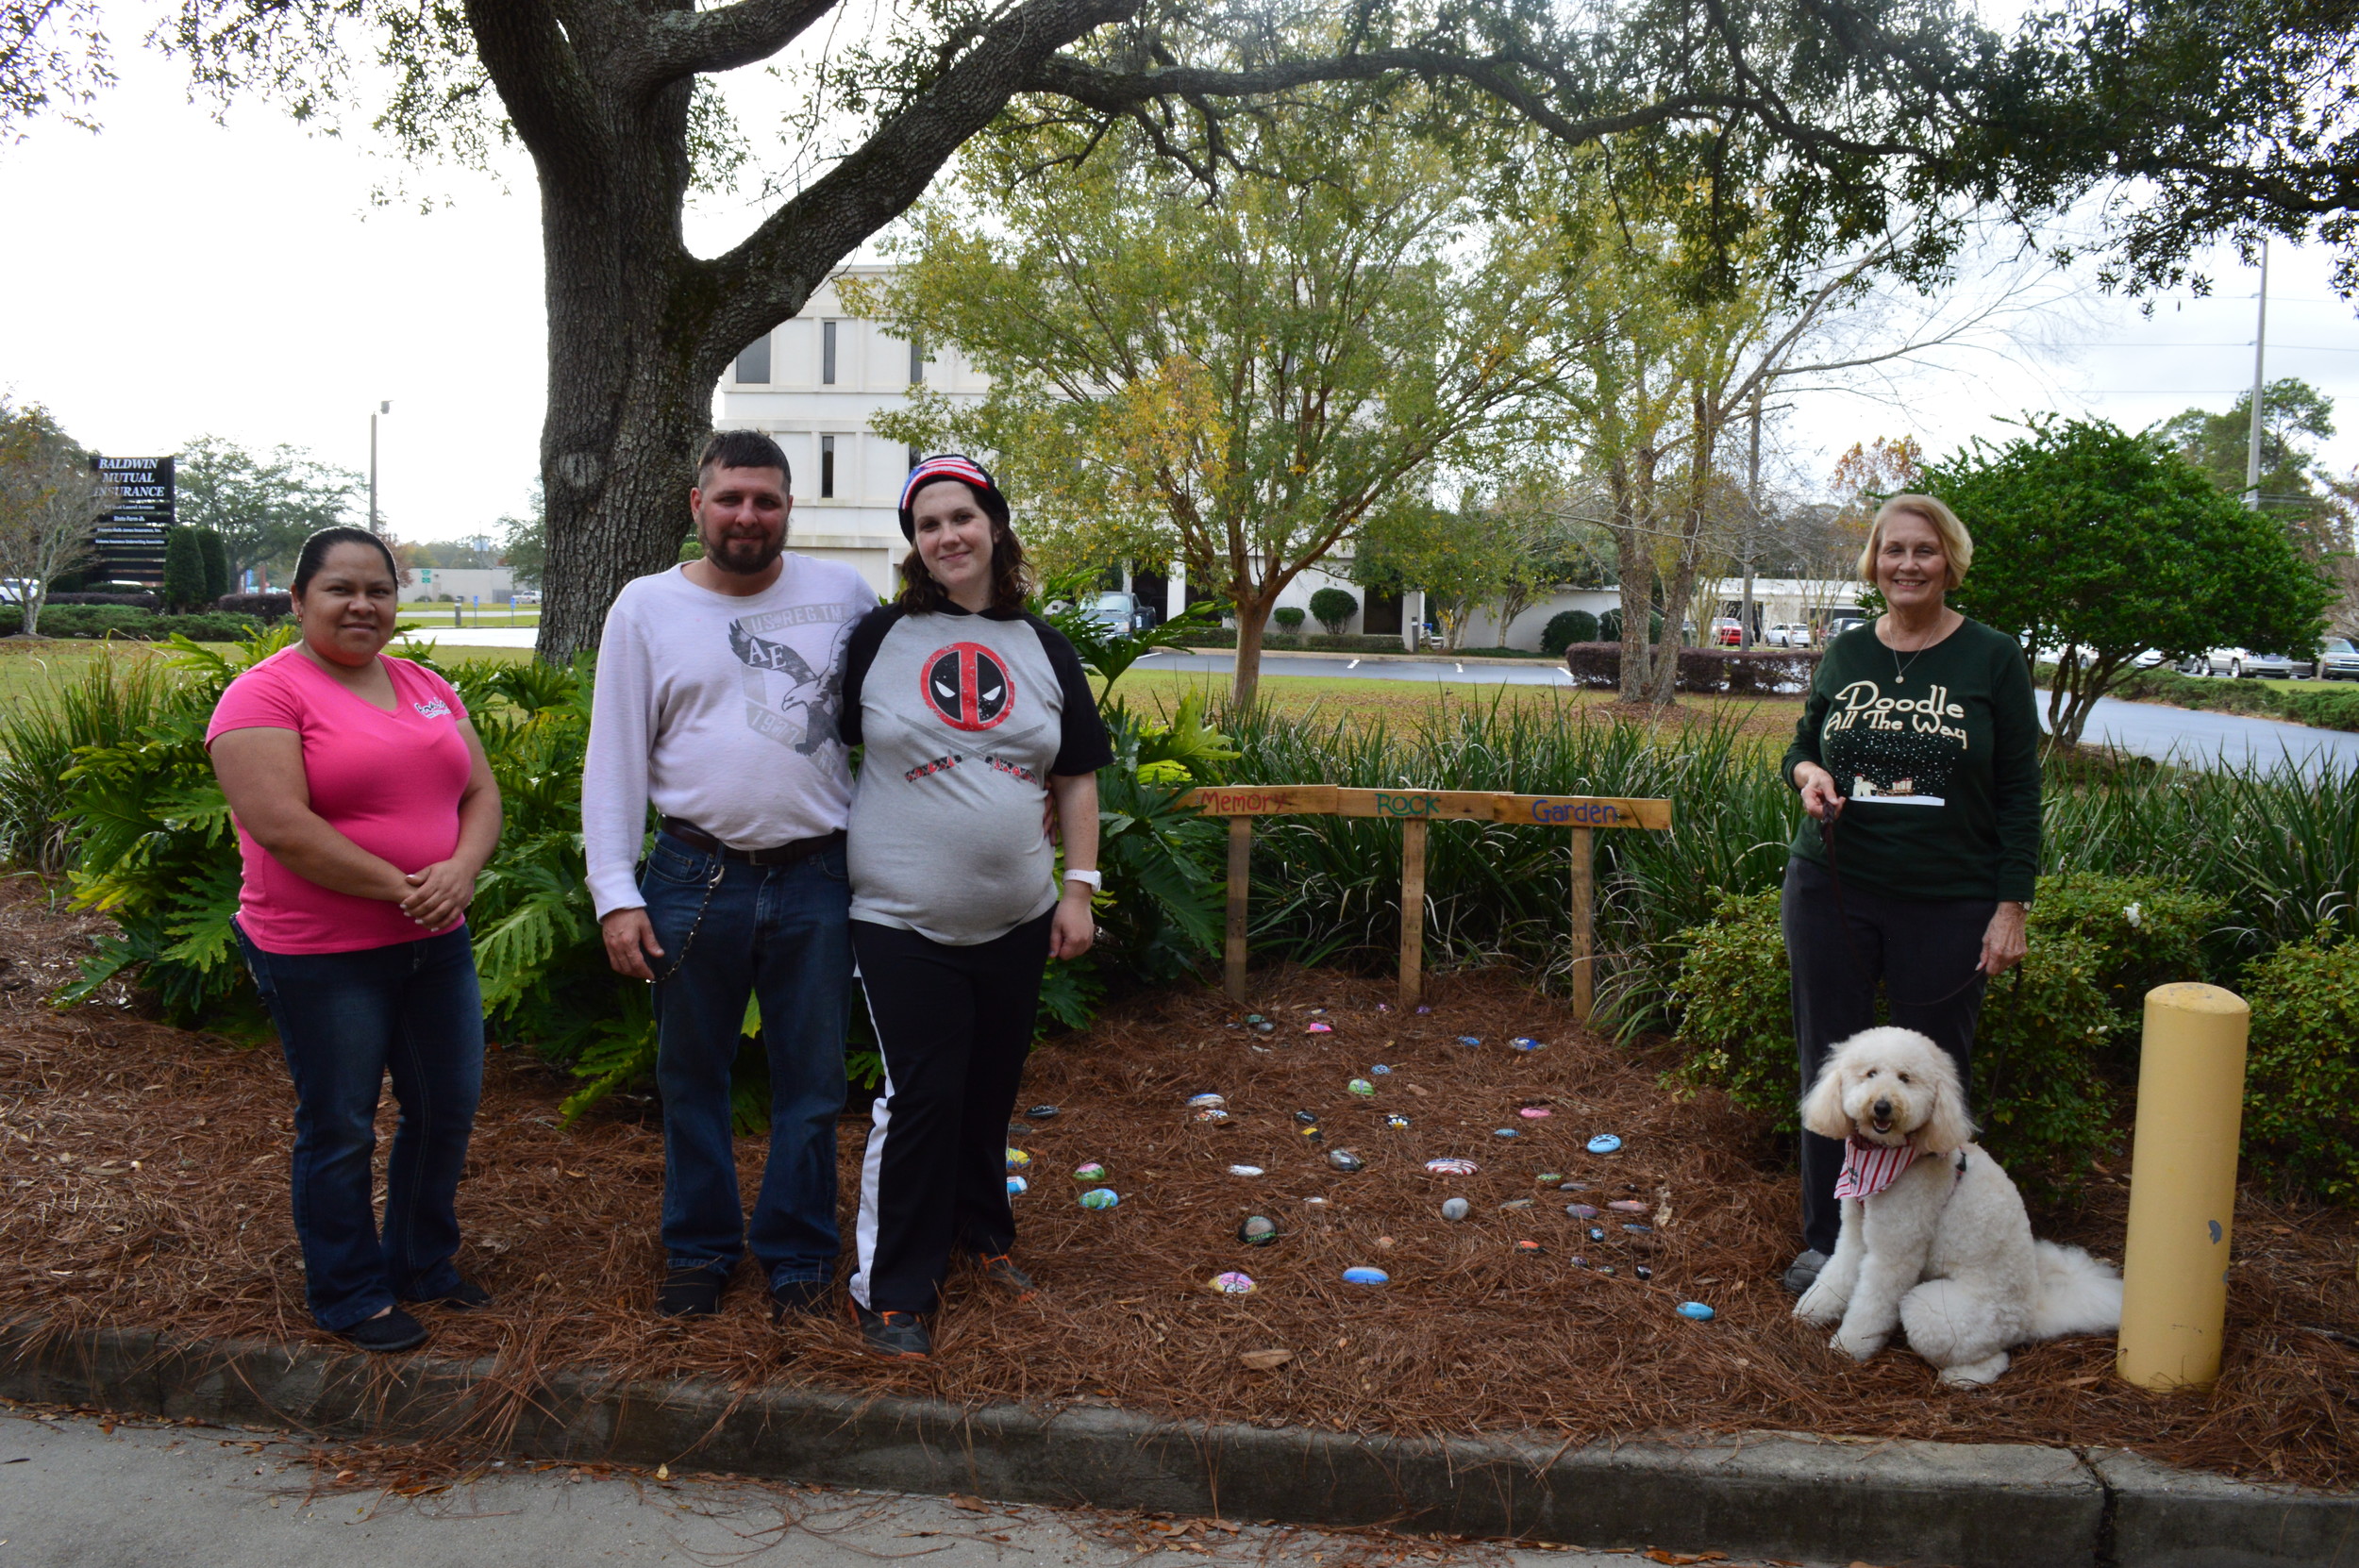 Pictured left to right: Sonia Cruz, Daniel Englert, Rachel Marotte, Lynda Folks (with her dog, Lottie May), have all contributed rocks to the Memory Rock Garden to honor special people and moments in their lives.